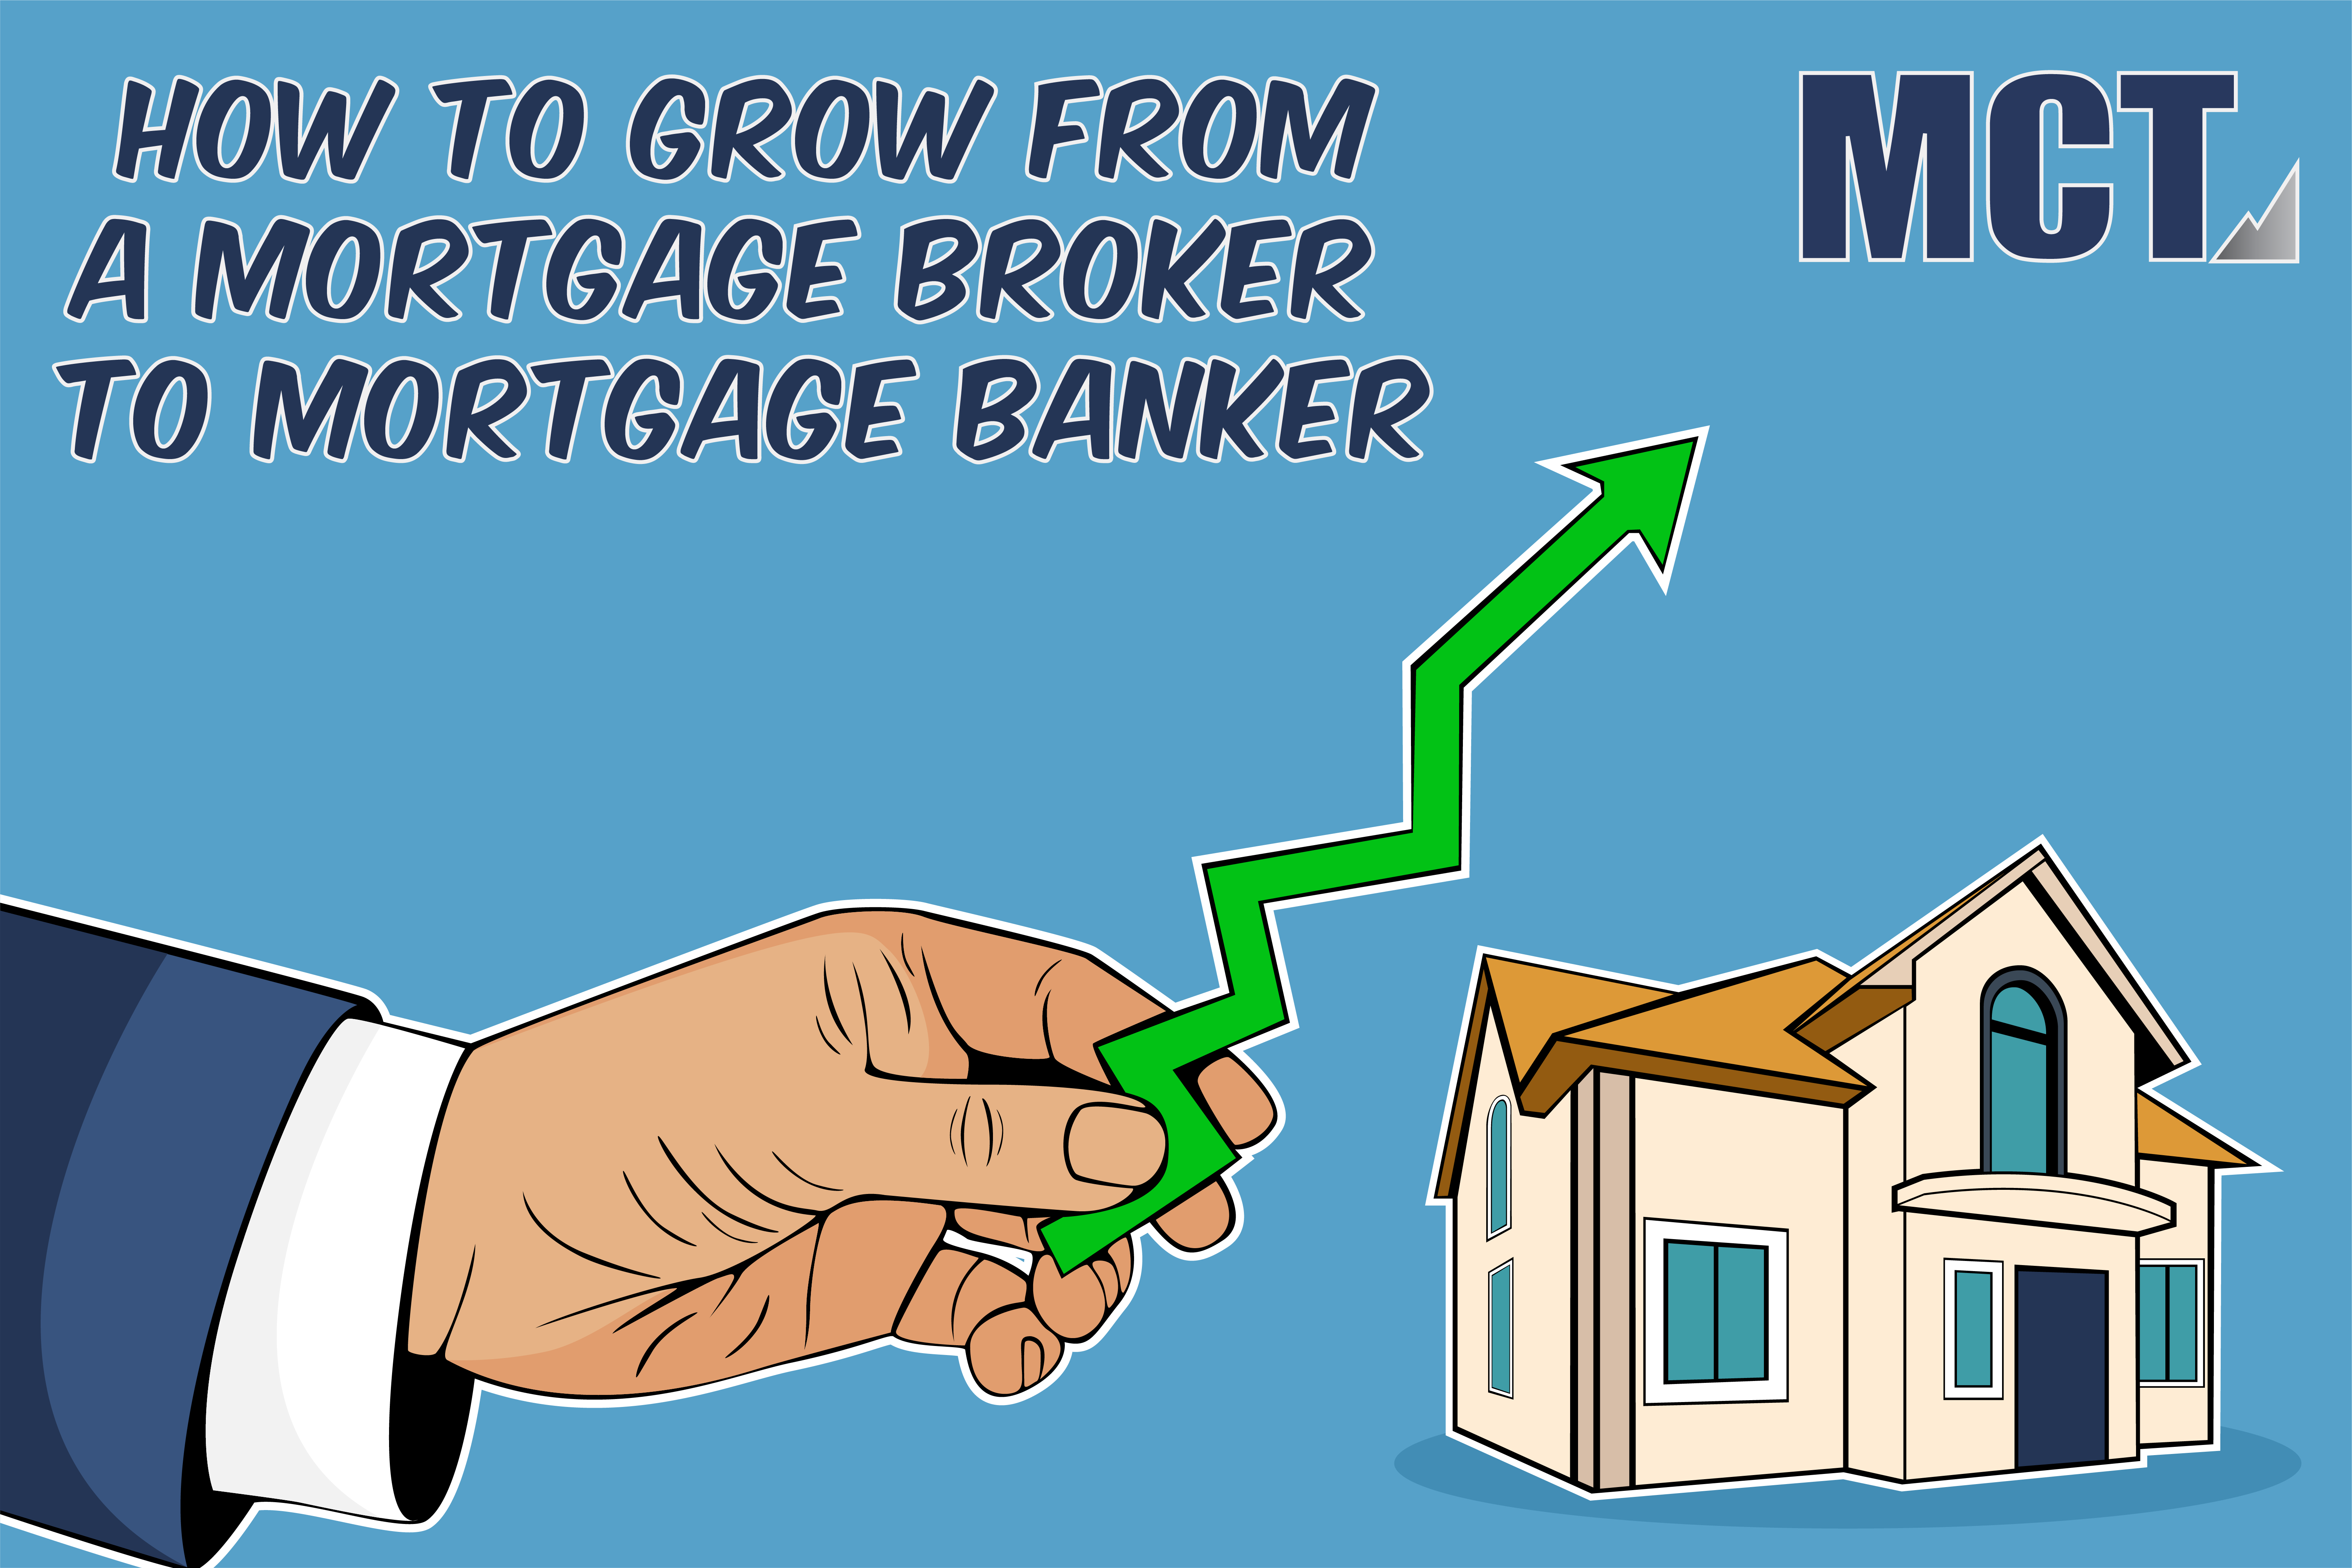 How to Grow from a Mortgage Broker to Mortgage Banker